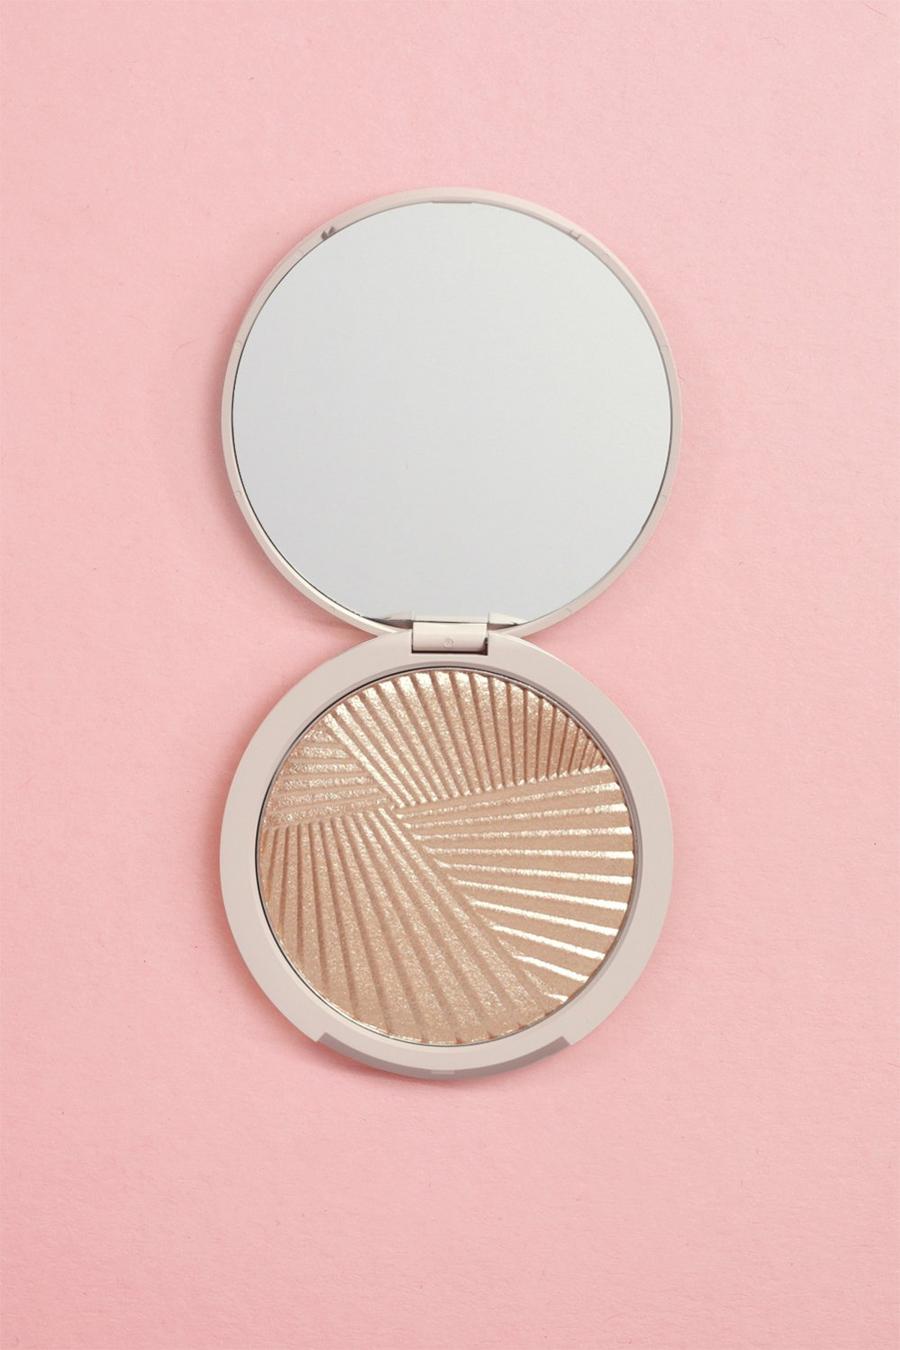 Champagne beis boohoo BEAUTY Face & Body Highlighter Powder Mirror